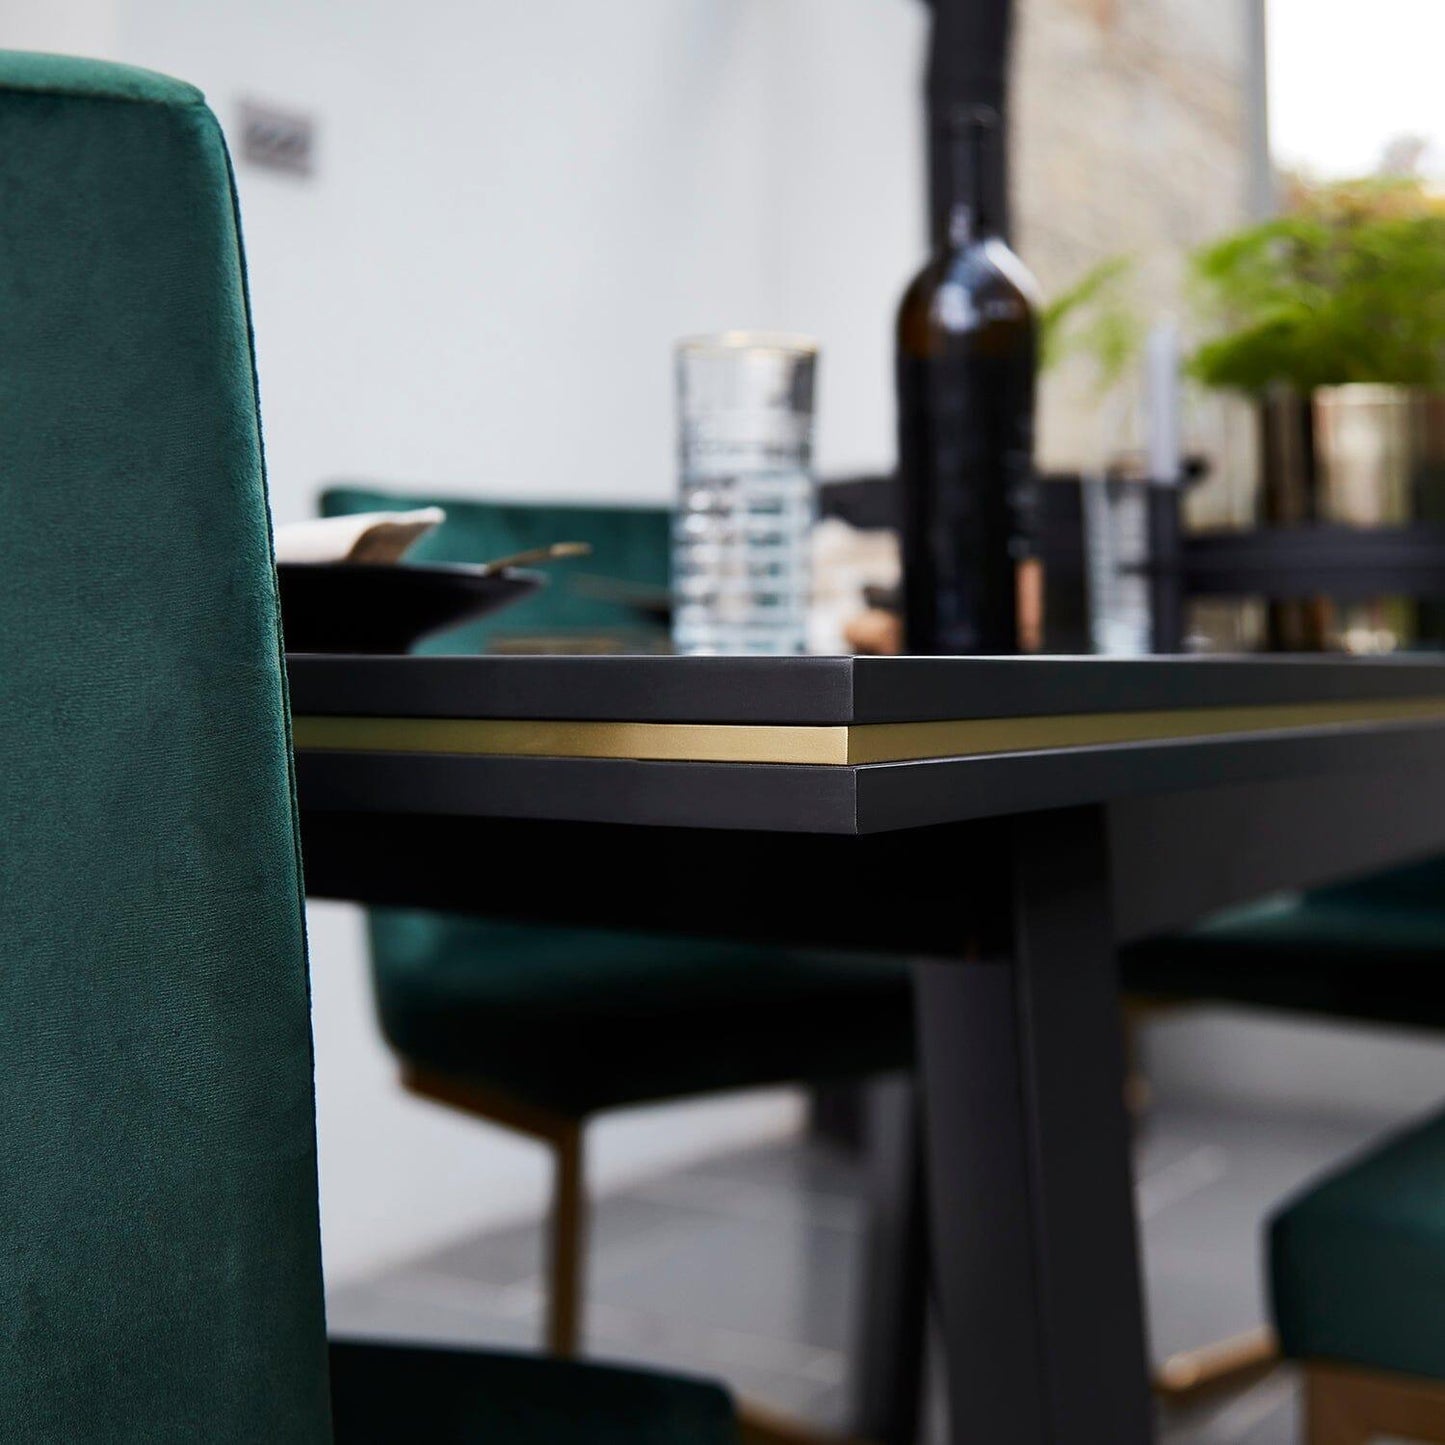 Iliana Black Dining Table Set with Green Velvet Dining Chairs - Laura James